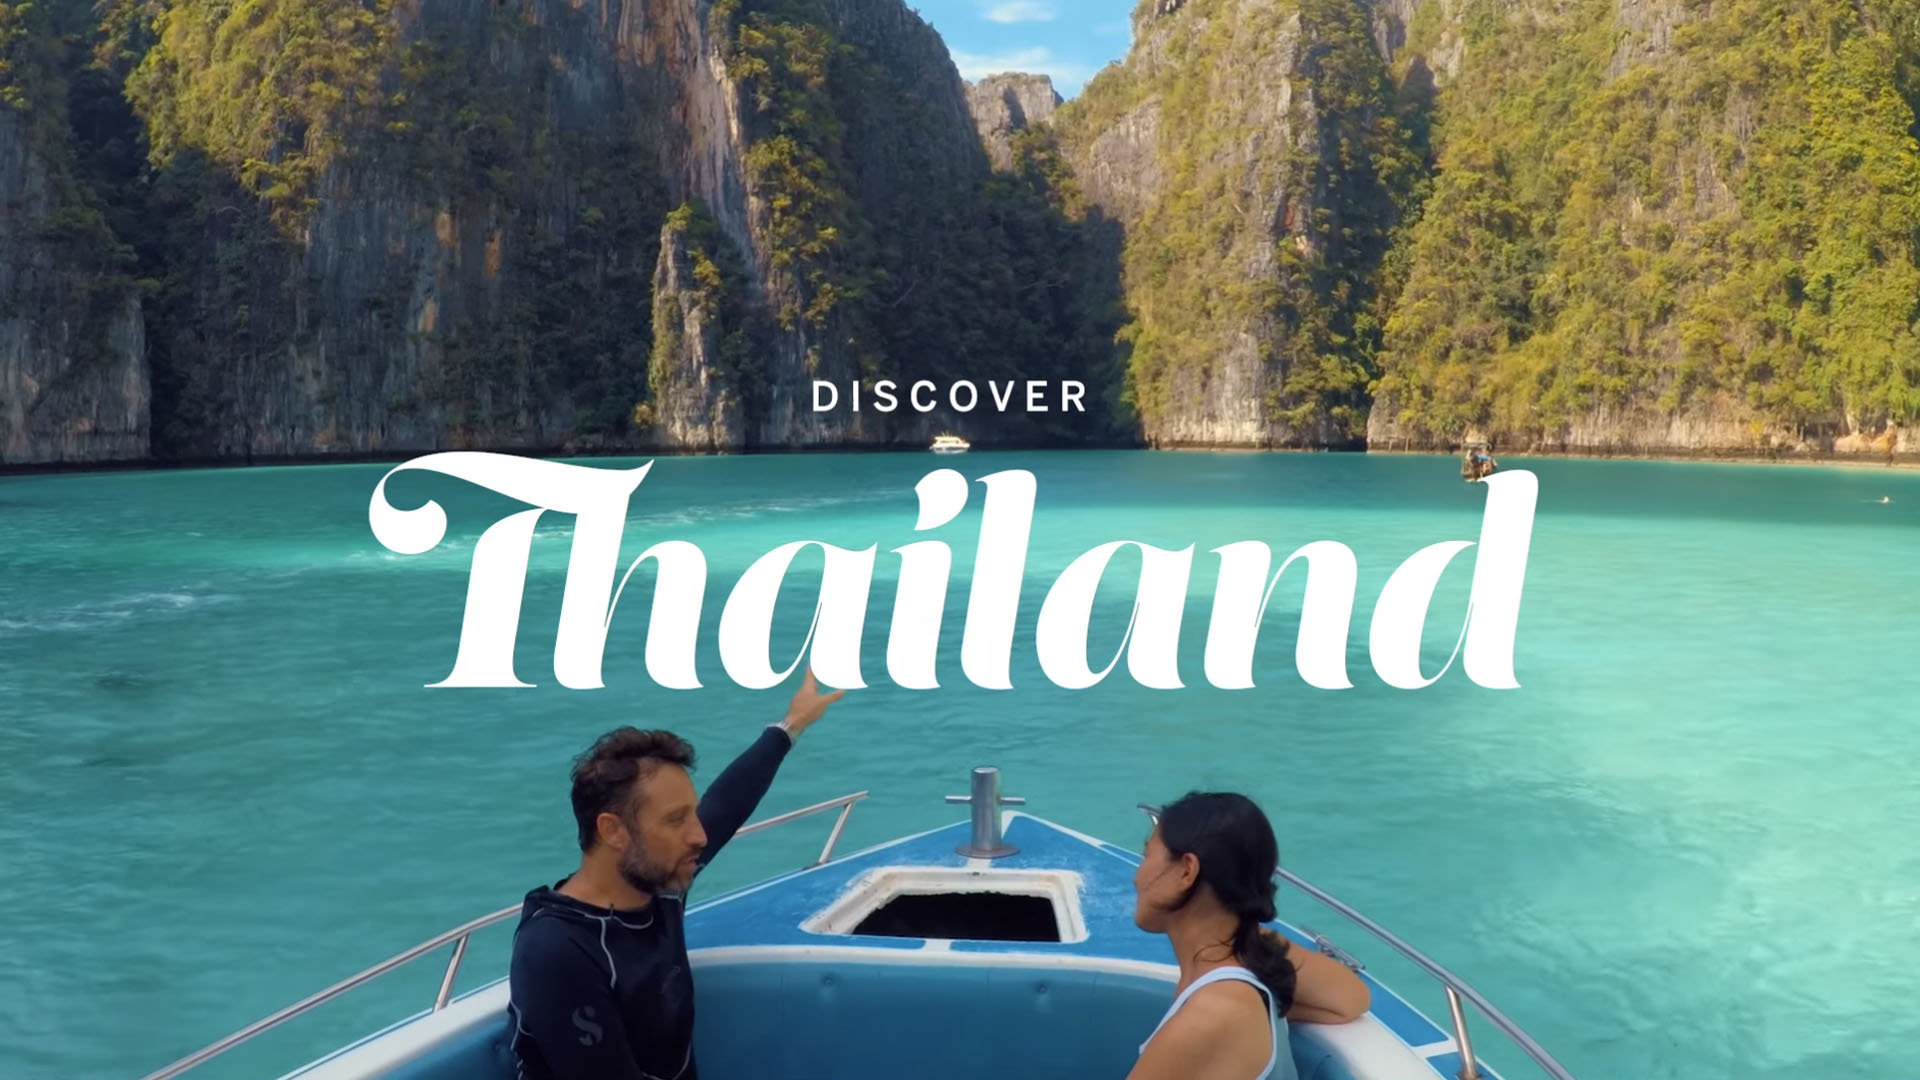 Lonely Planet x GoPro: Discover Thailand